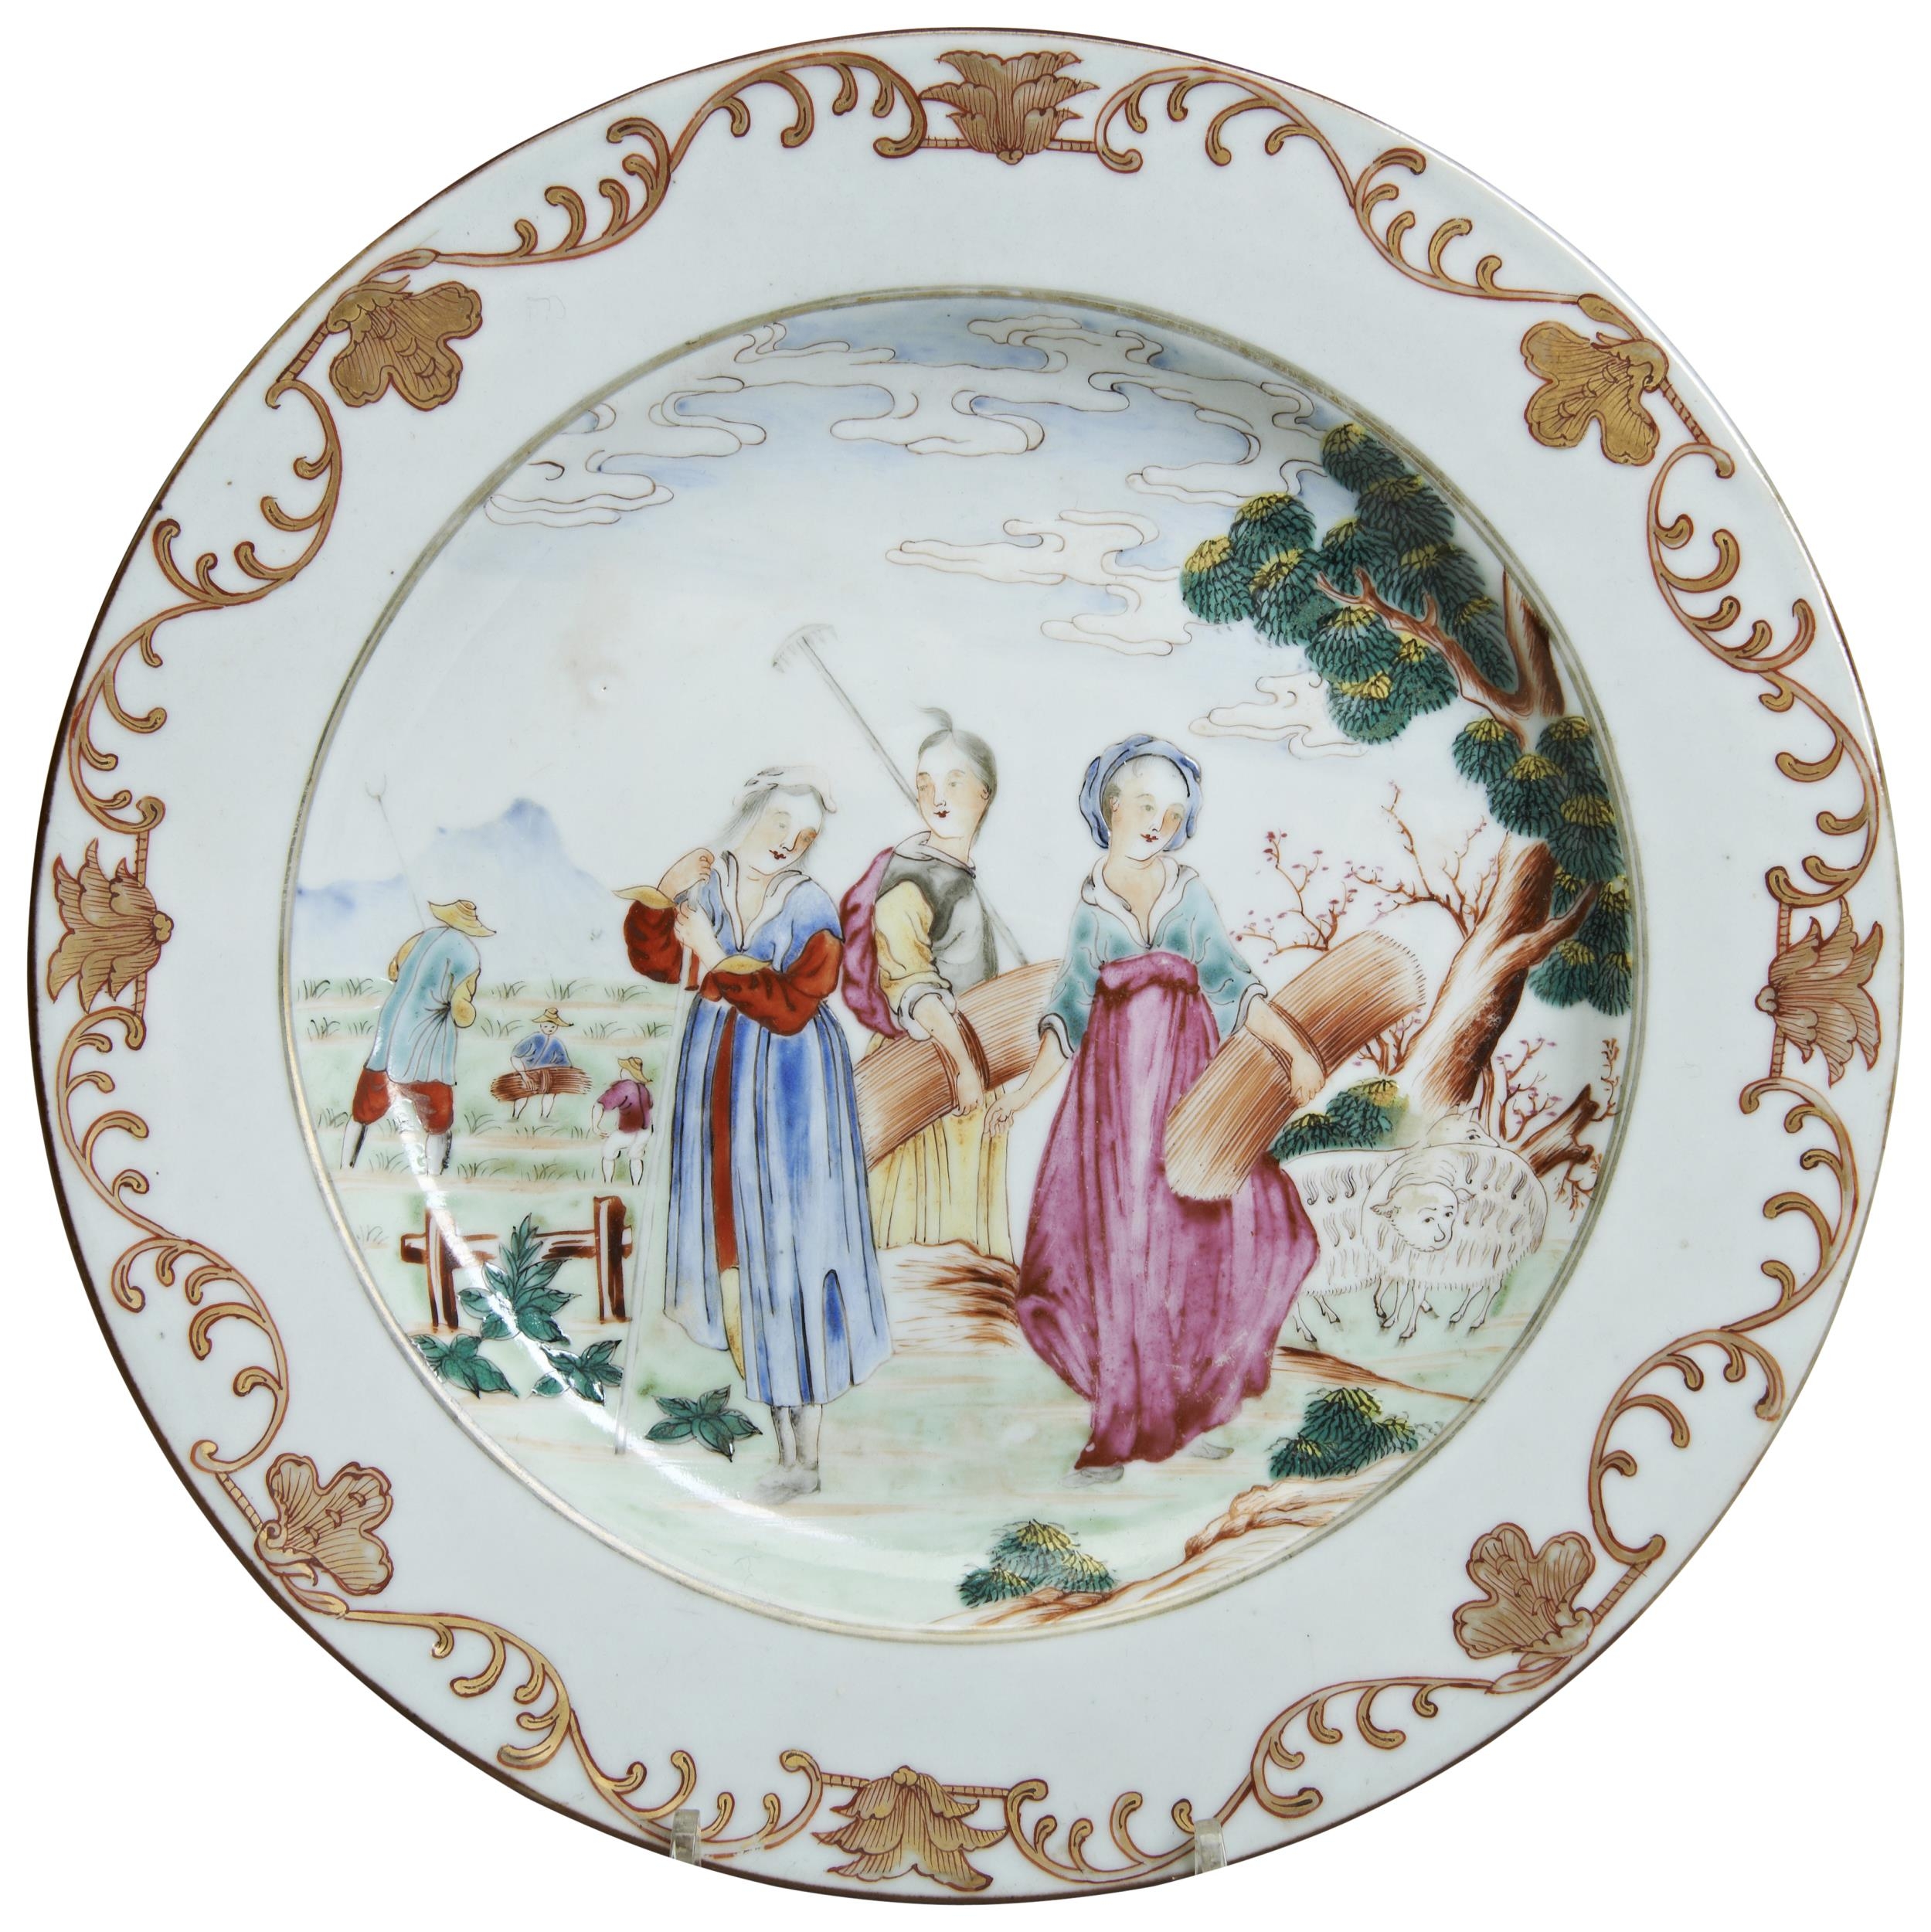 A FAMILLE ROSE 'EUROPEAN-SUBJECT' DISH QIANLONG PERIOD (1736-1795) painted with a figural harvest